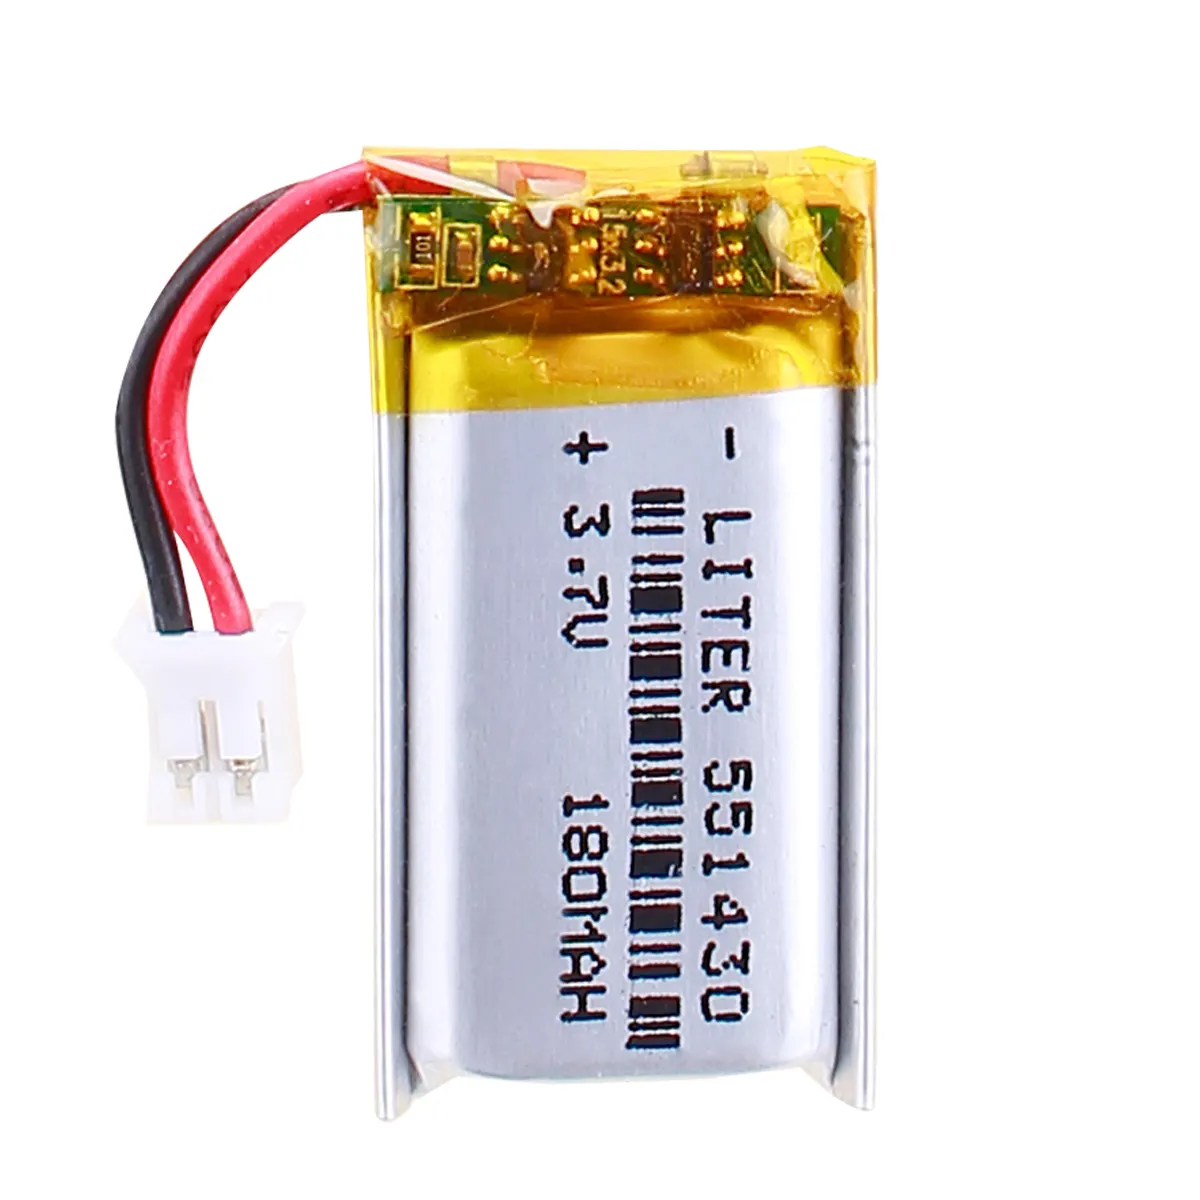 3.7V 180mAh 551430 rechargeable li polymer battery With 2pin PH 2.0mm connector